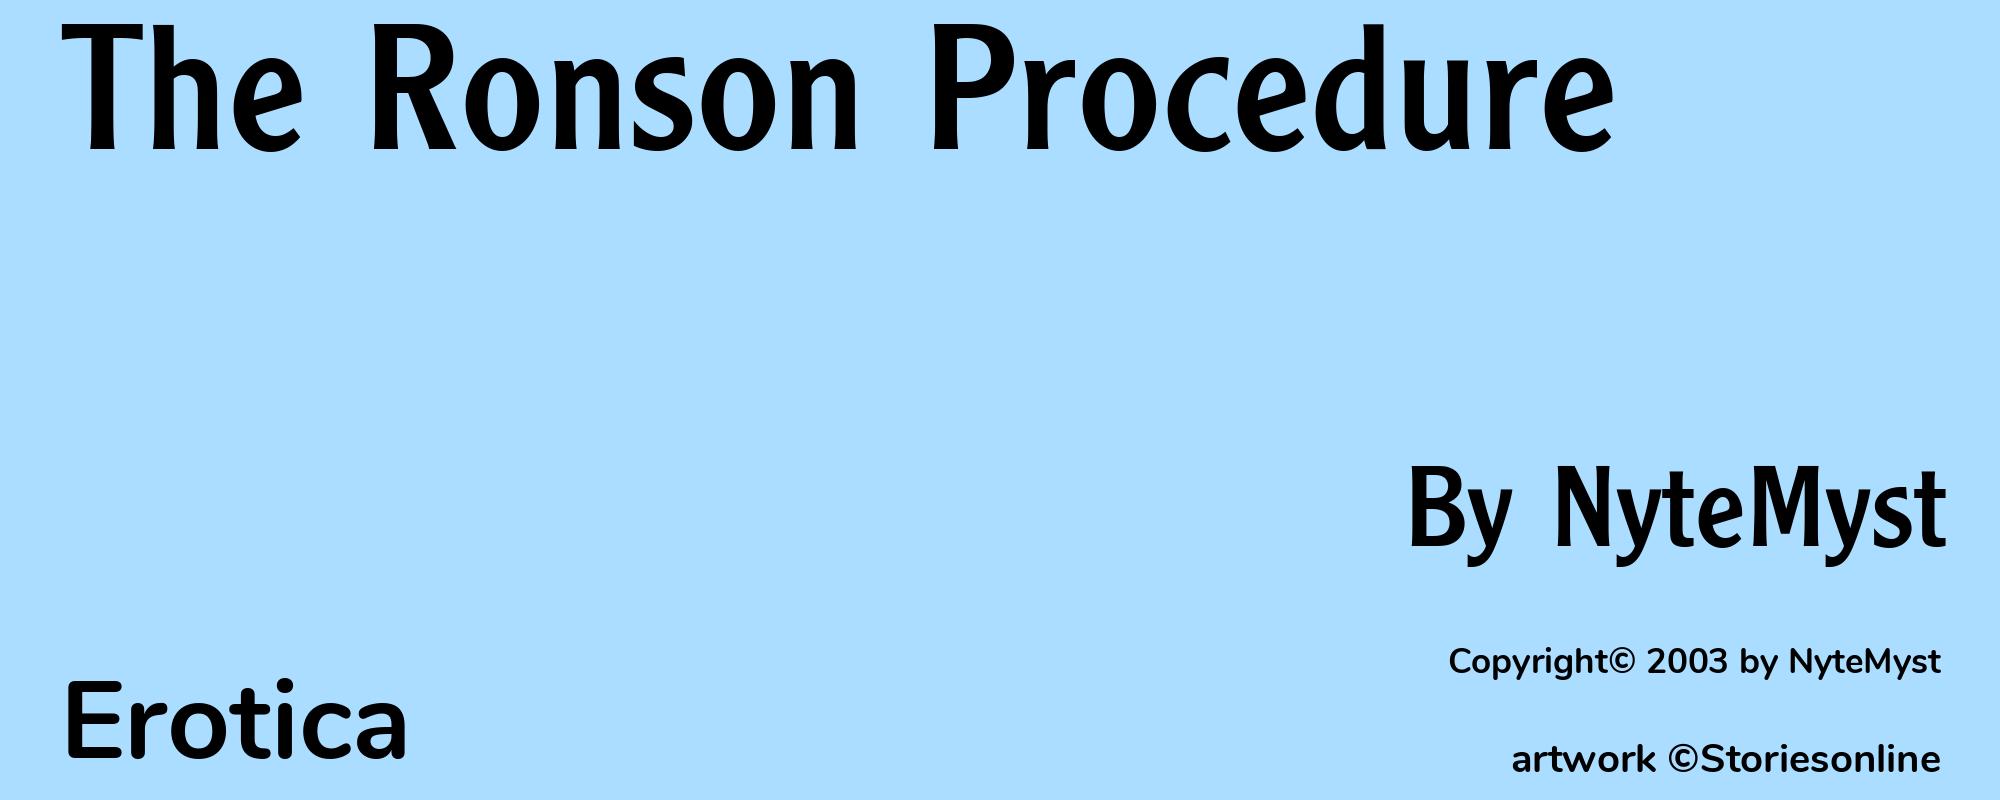 The Ronson Procedure - Cover